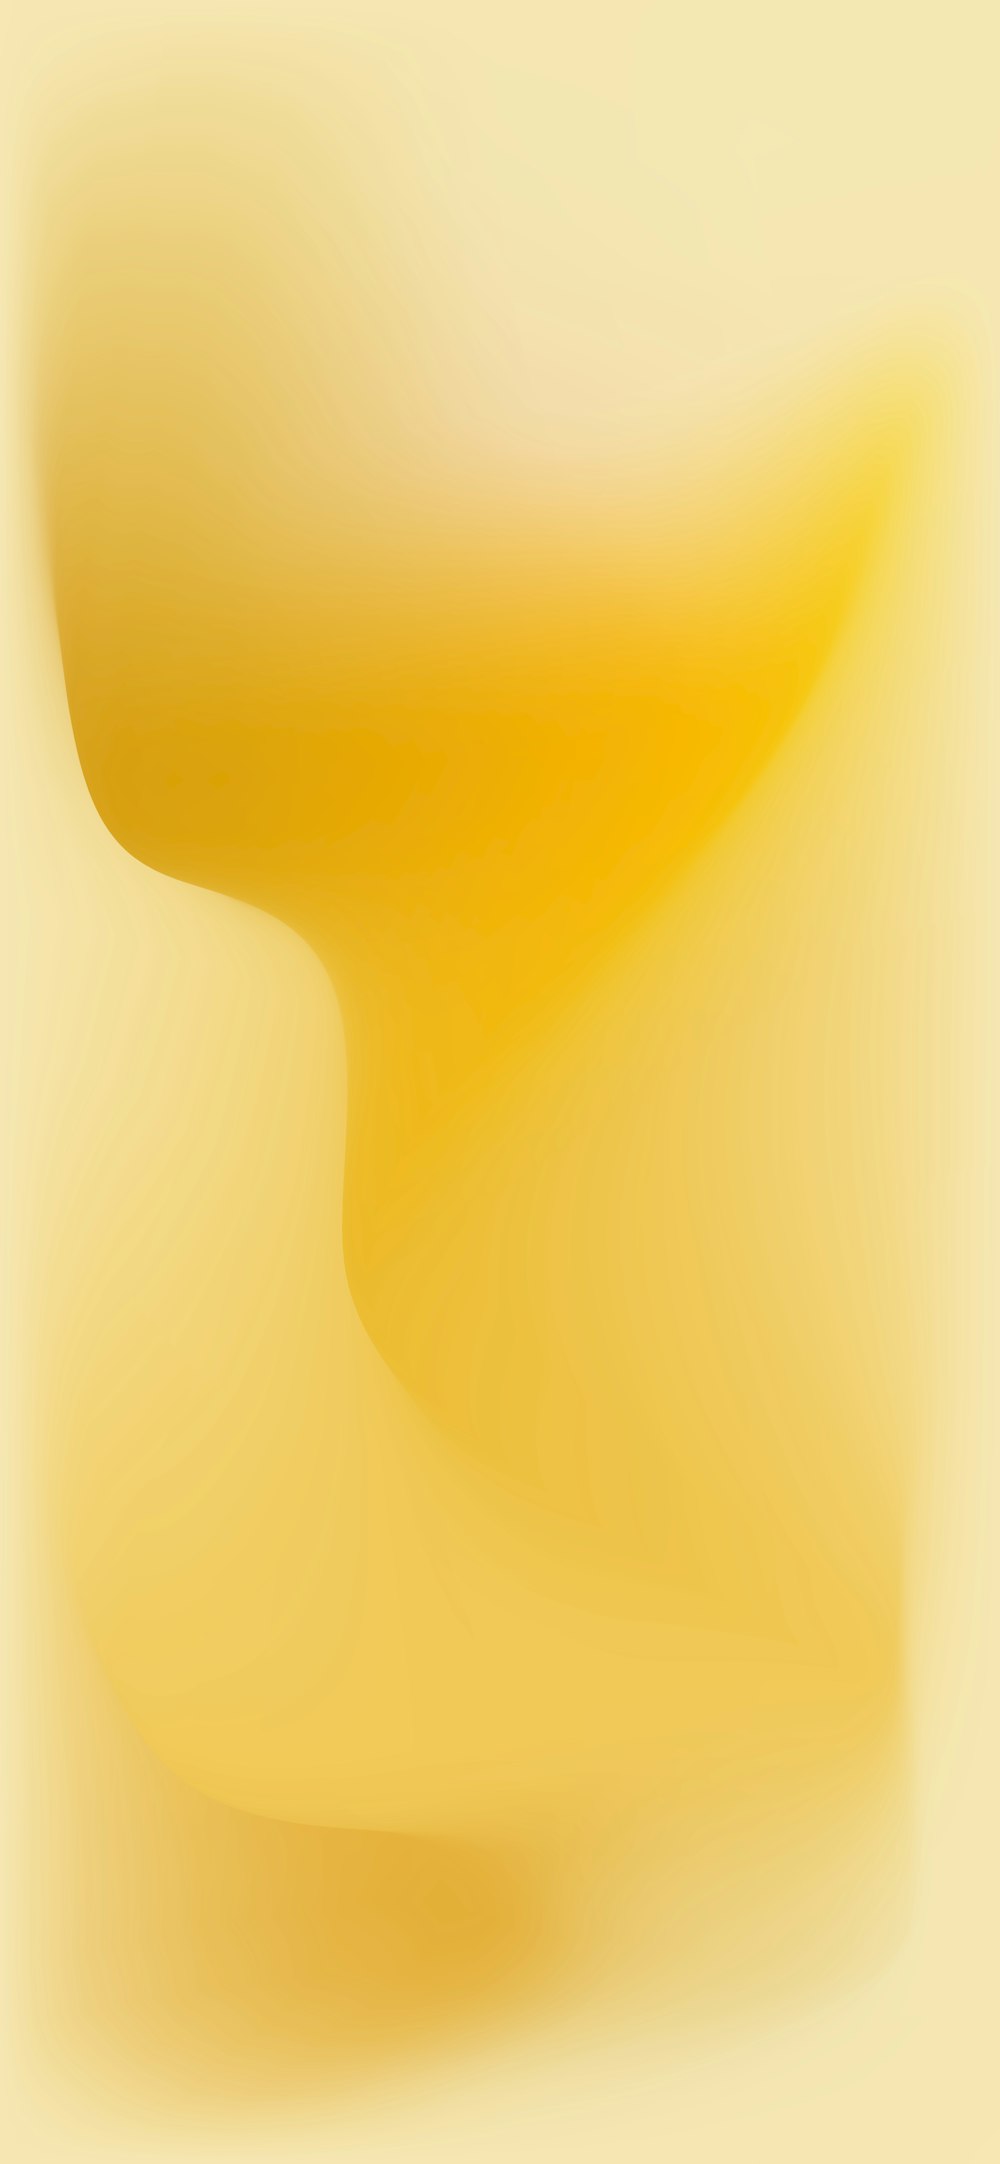 a blurry image of a yellow background